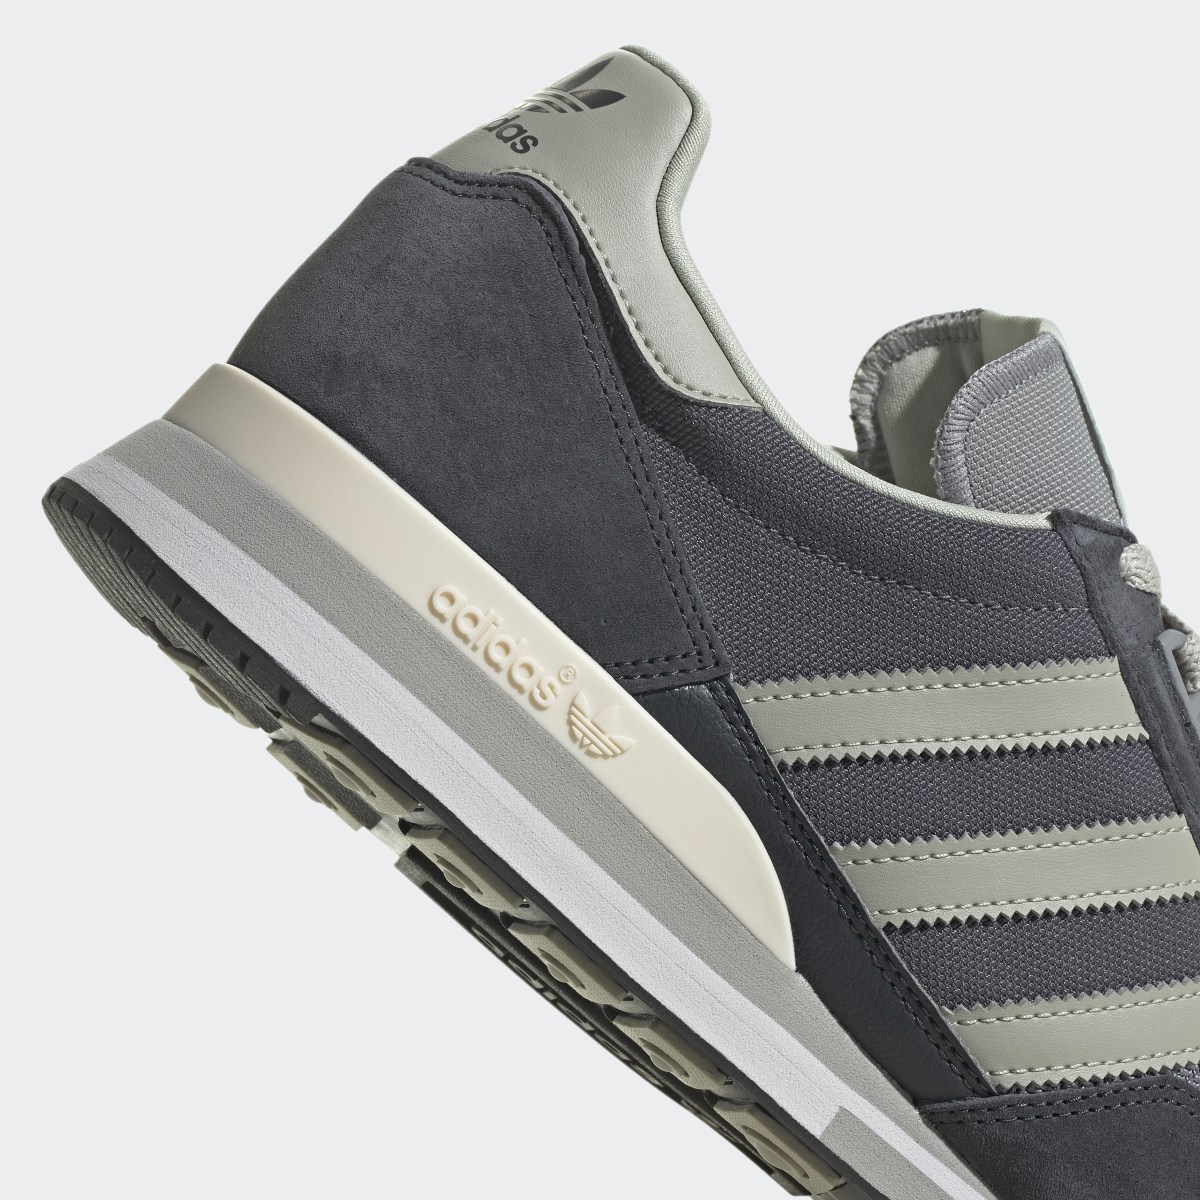 Adidas ZX 500 Shoes. 10